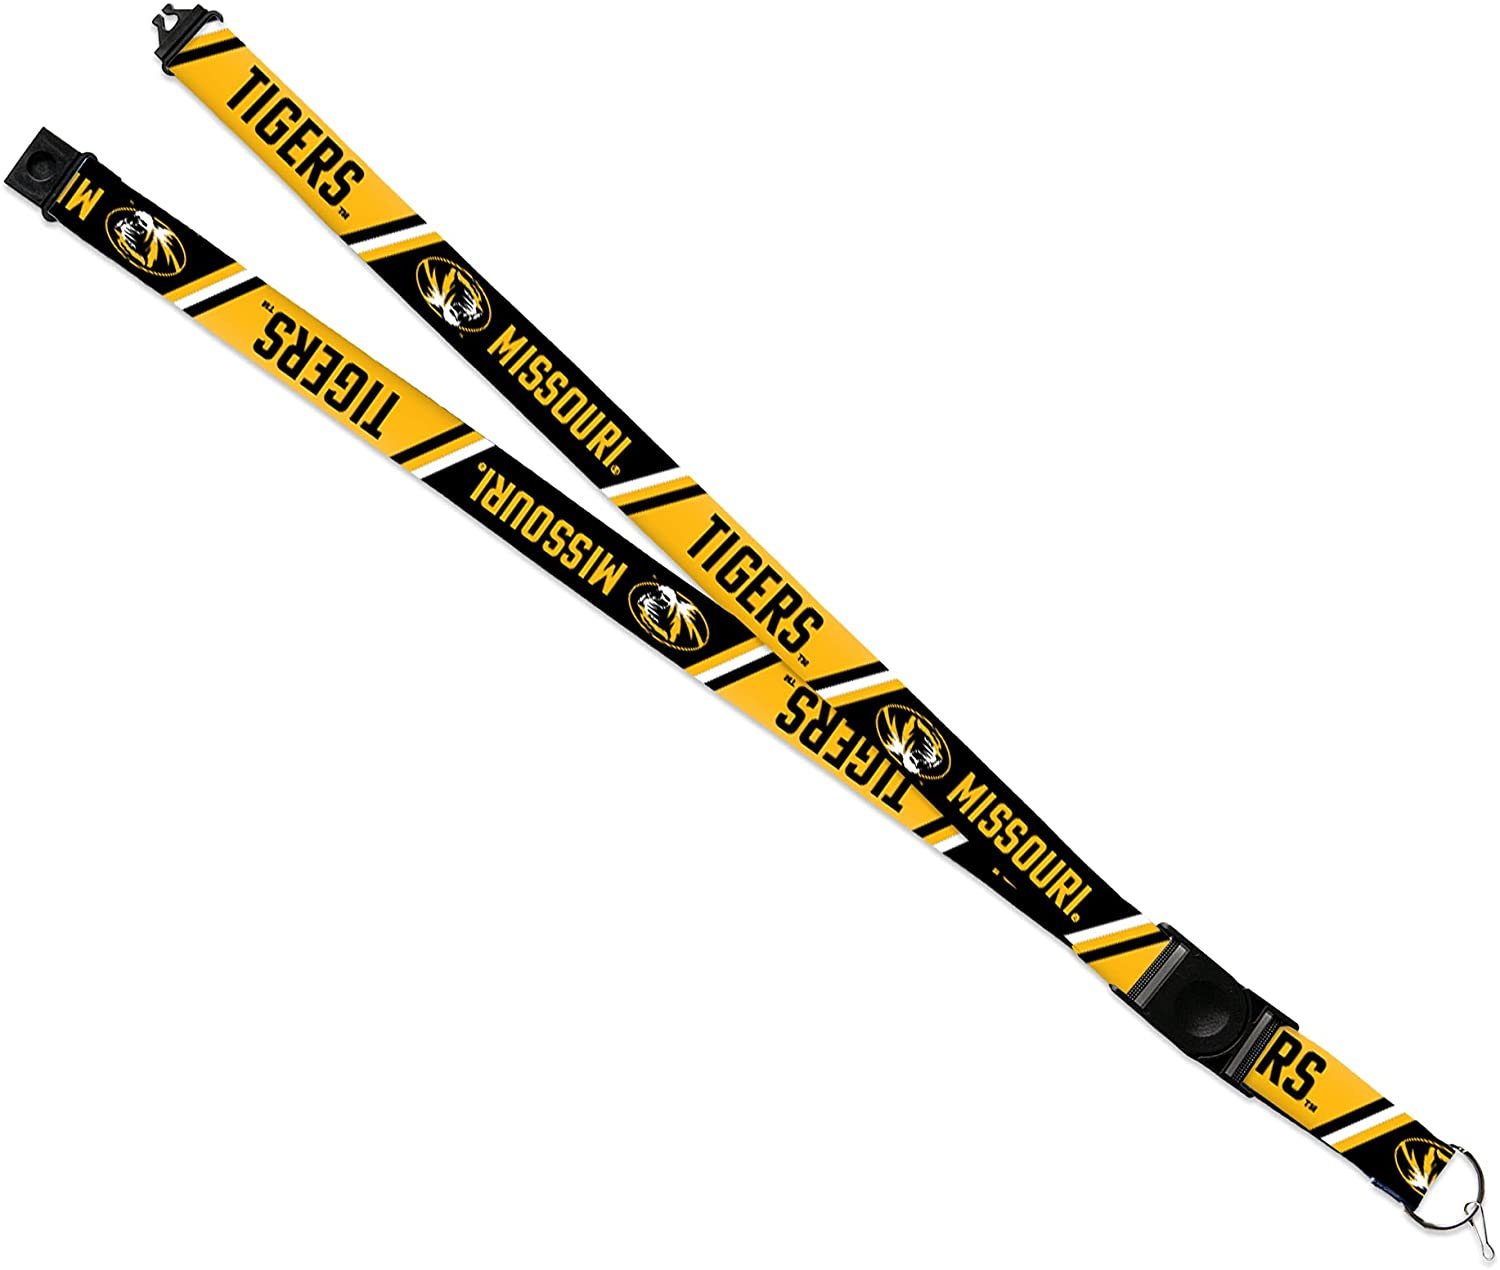 University of Missouri Tigers Lanyard Keychain Double Sided 18 Inch Button Clip Safety Breakaway